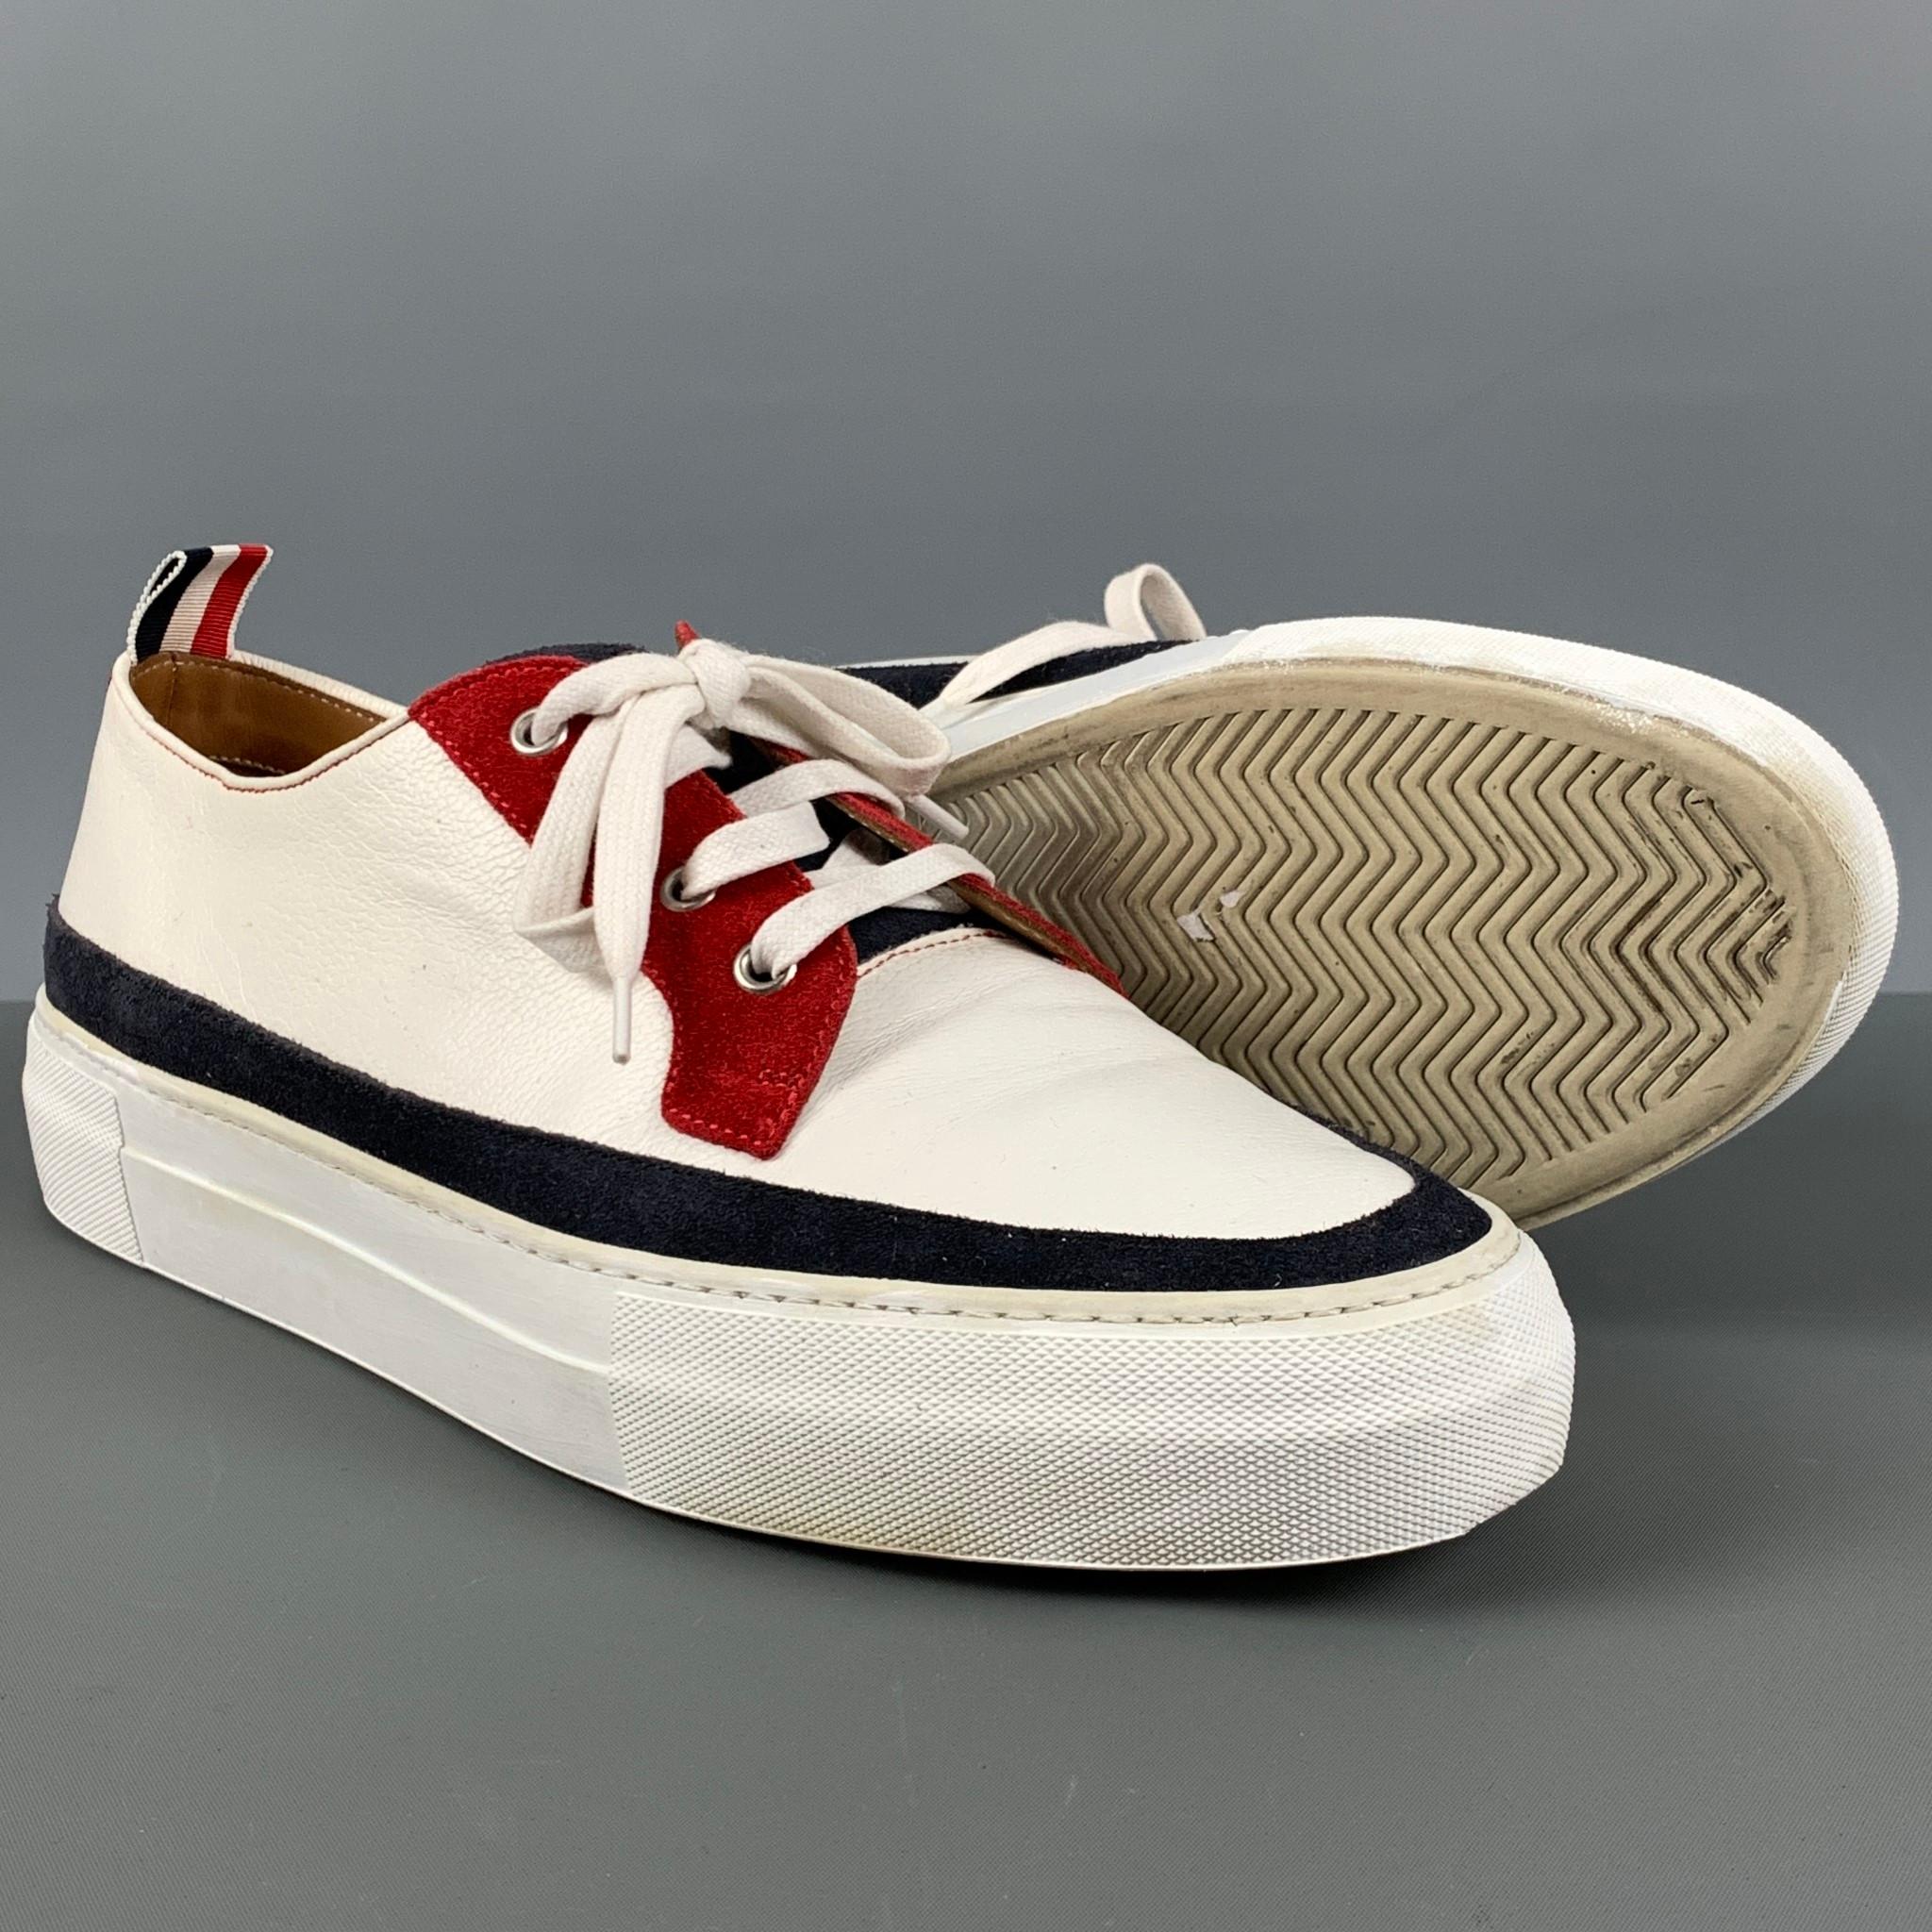 Men's THOM BROWNE Size 10 White Red & Blue Color Block Leather Platform Sneakers